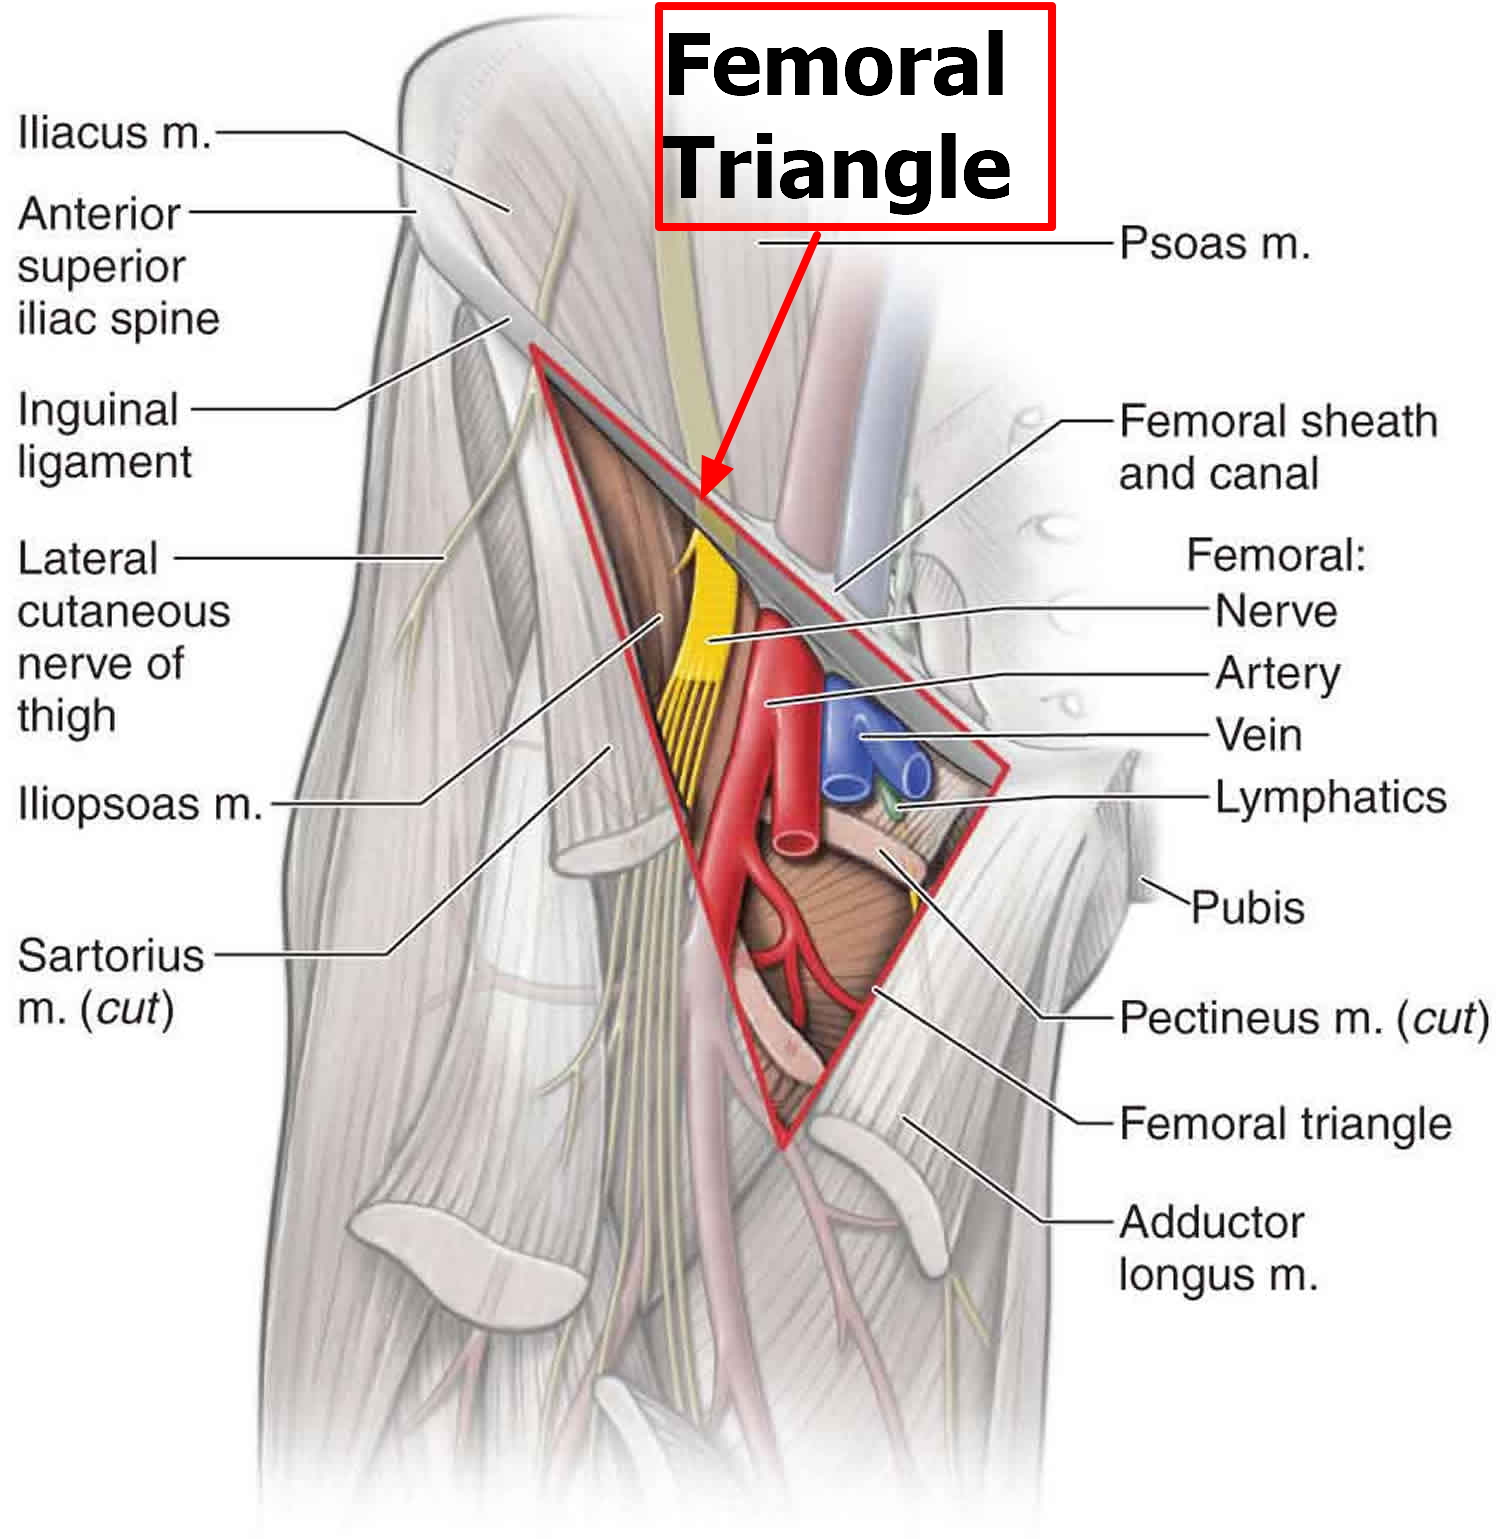 Femoral Artery - Common, Superficial, Deep - Location & Function